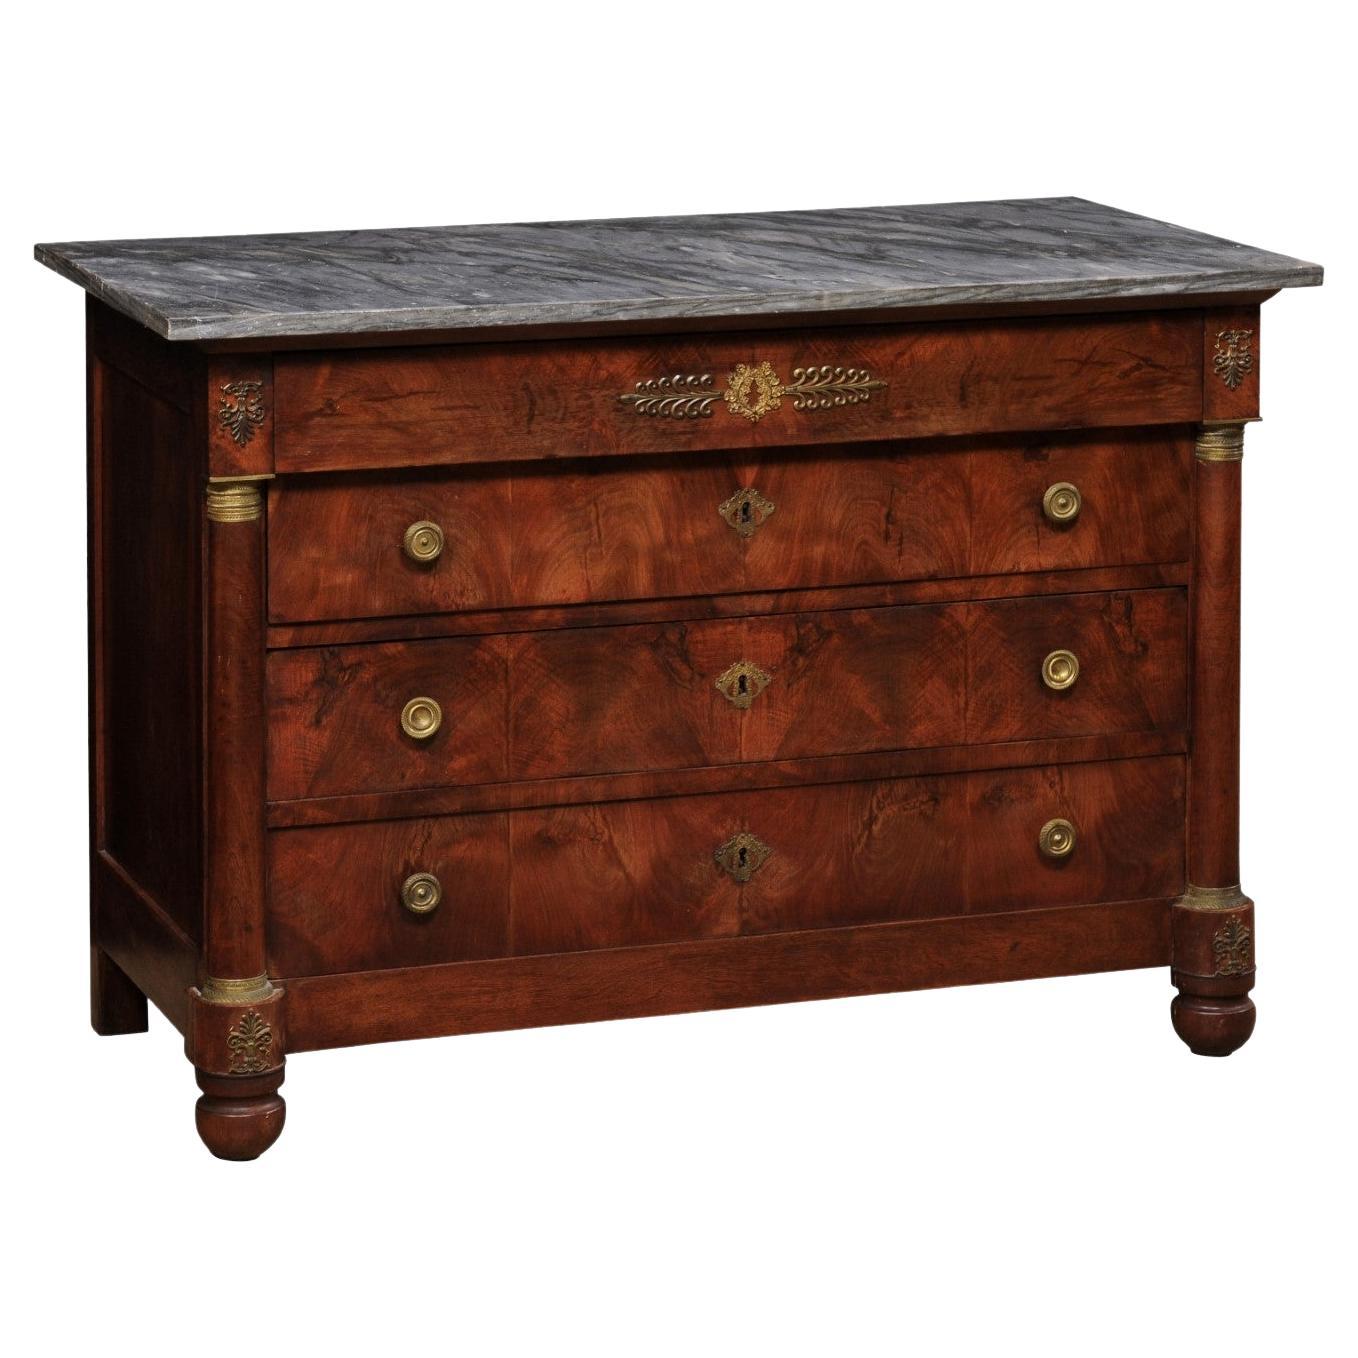 19th Century Neoclassical French Marble-Top Commode W/Exquisite Brass Accents For Sale